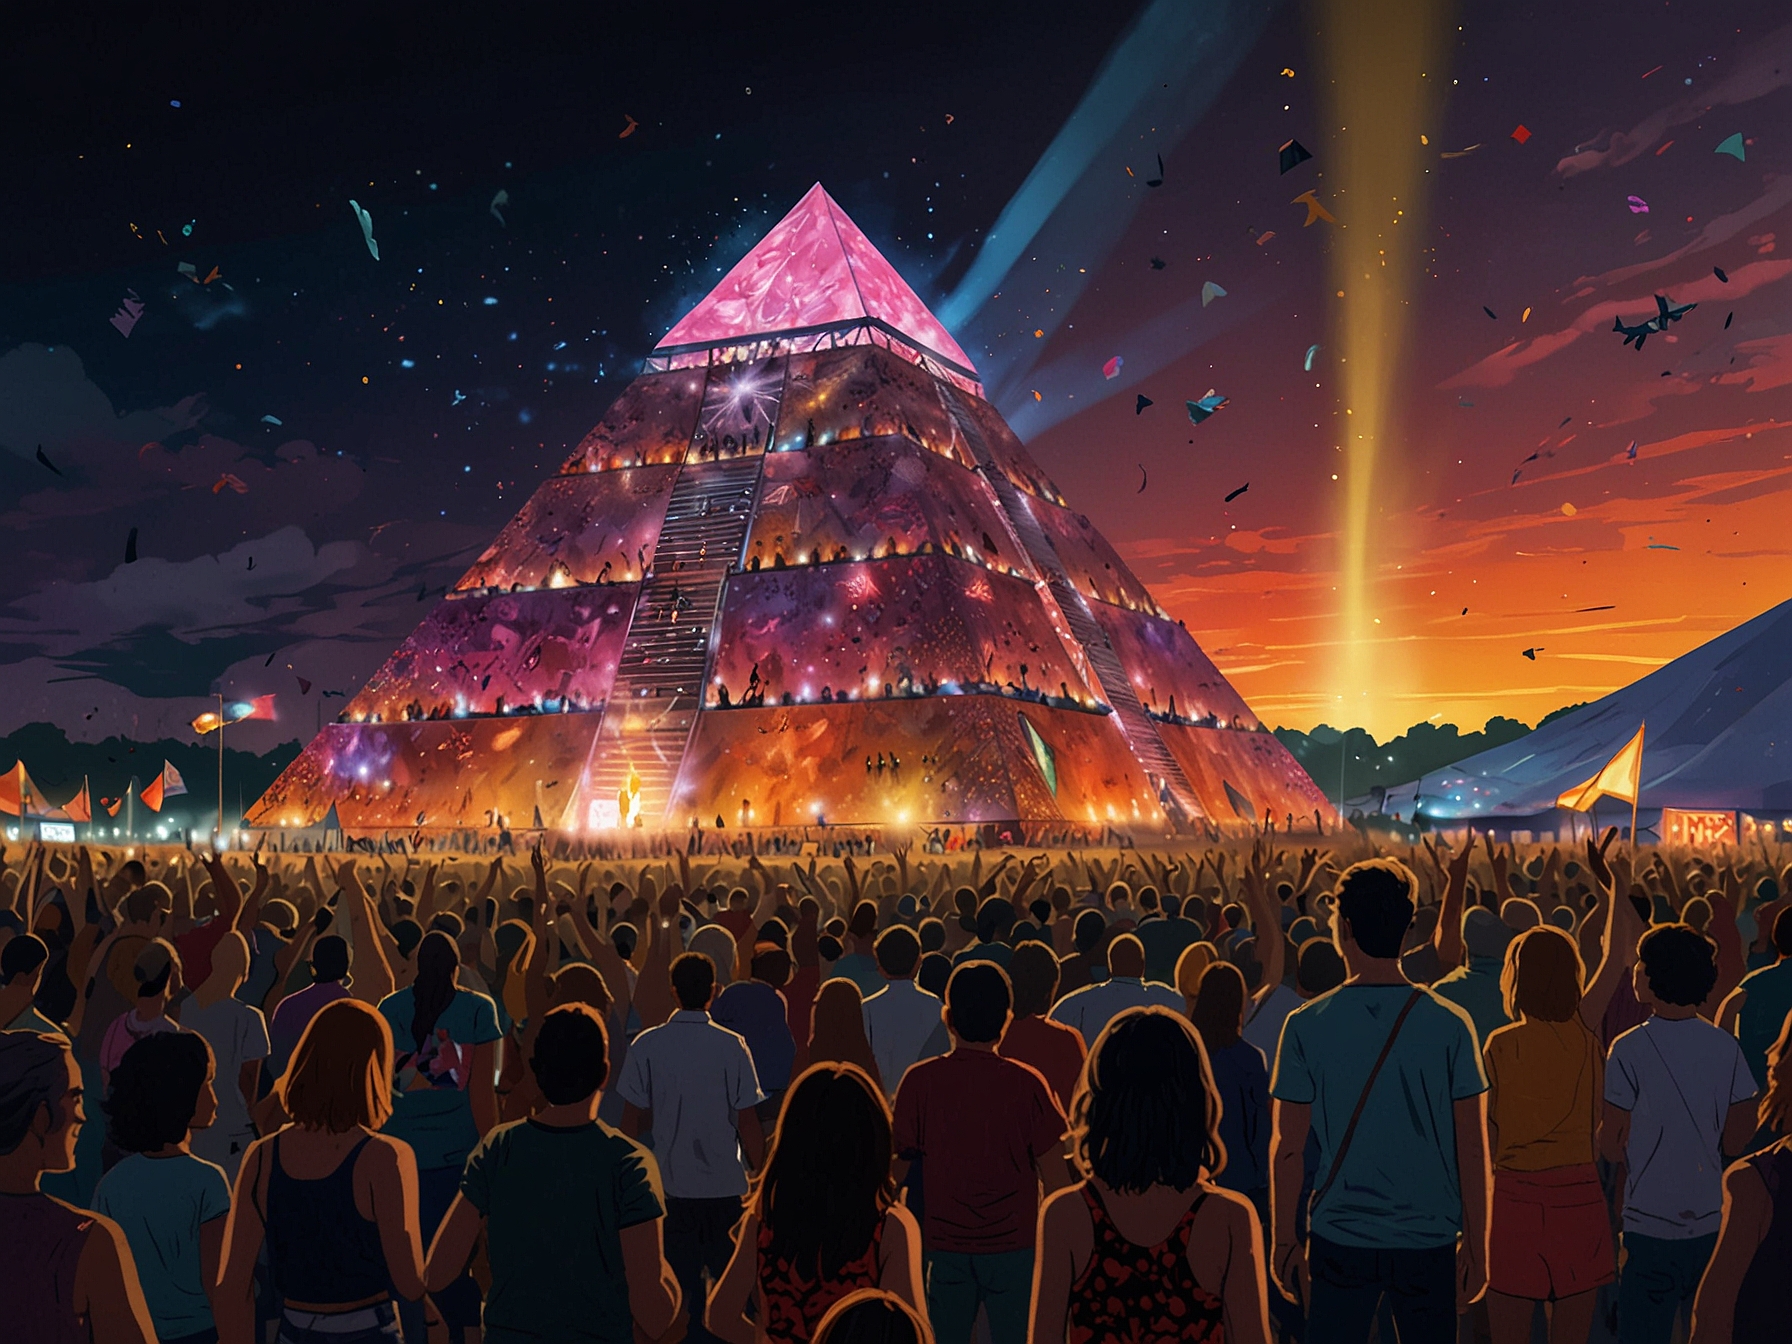 The vast, colorful crowd at Glastonbury Festival 2023 enjoys the vibrant ambiance. The iconic Pyramid Stage serves as the backdrop for unforgettable performances, including Dua Lipa's headline set.